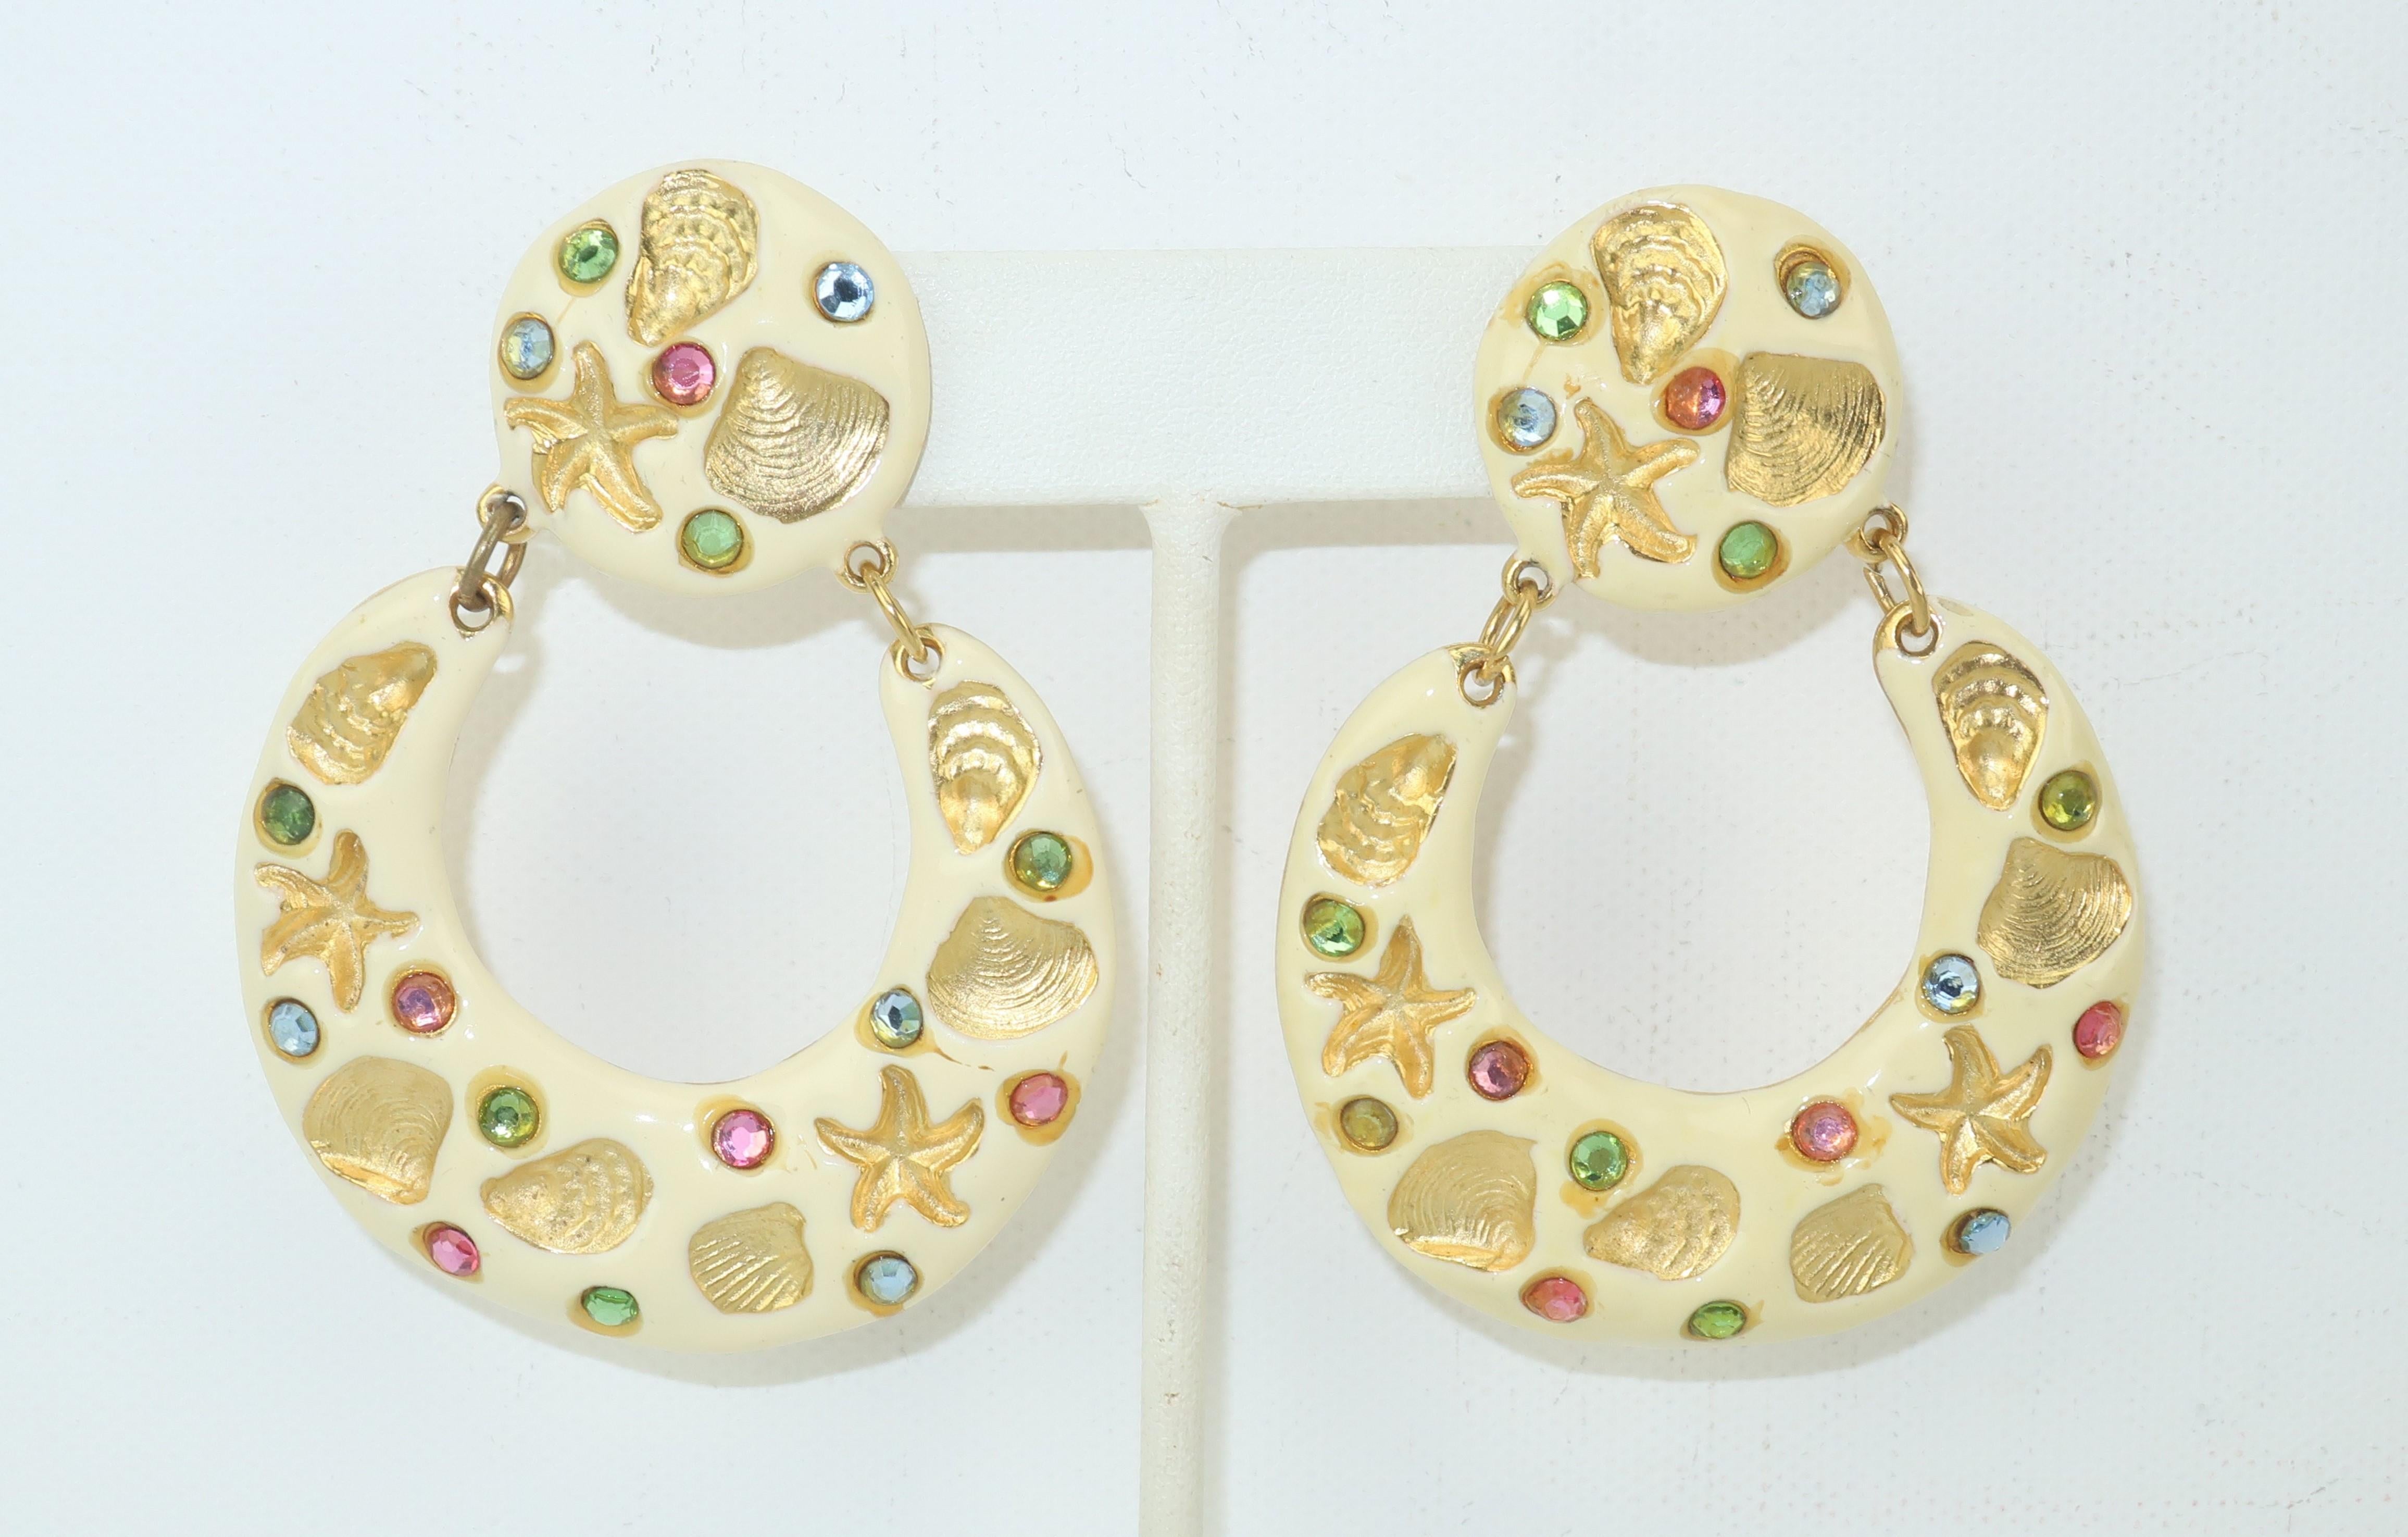 She sells seashells by the sea shore ... all while wearing stylish 1970’s Gem-Craft earrings by Gene Verri!  The clip on earrings feature an articulated drop hoop fully decorated in a creamy off-white enamel with shell and starfish impressions